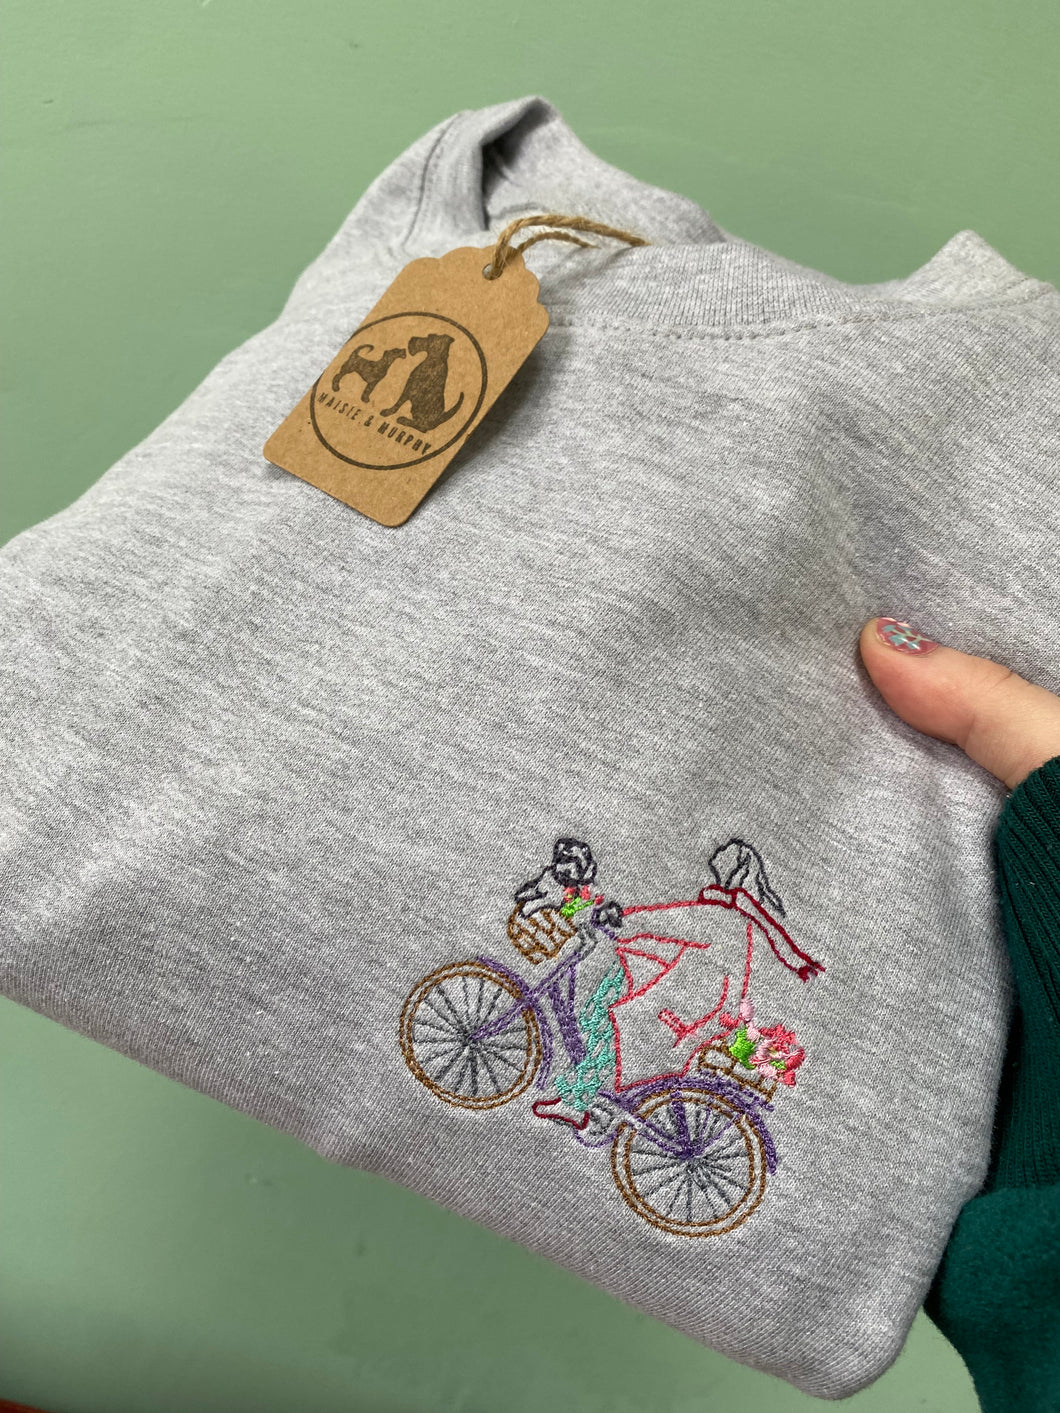 Cute Bicycle Dog Basket Sweatshirt - Embroidered sweater for dog lovers